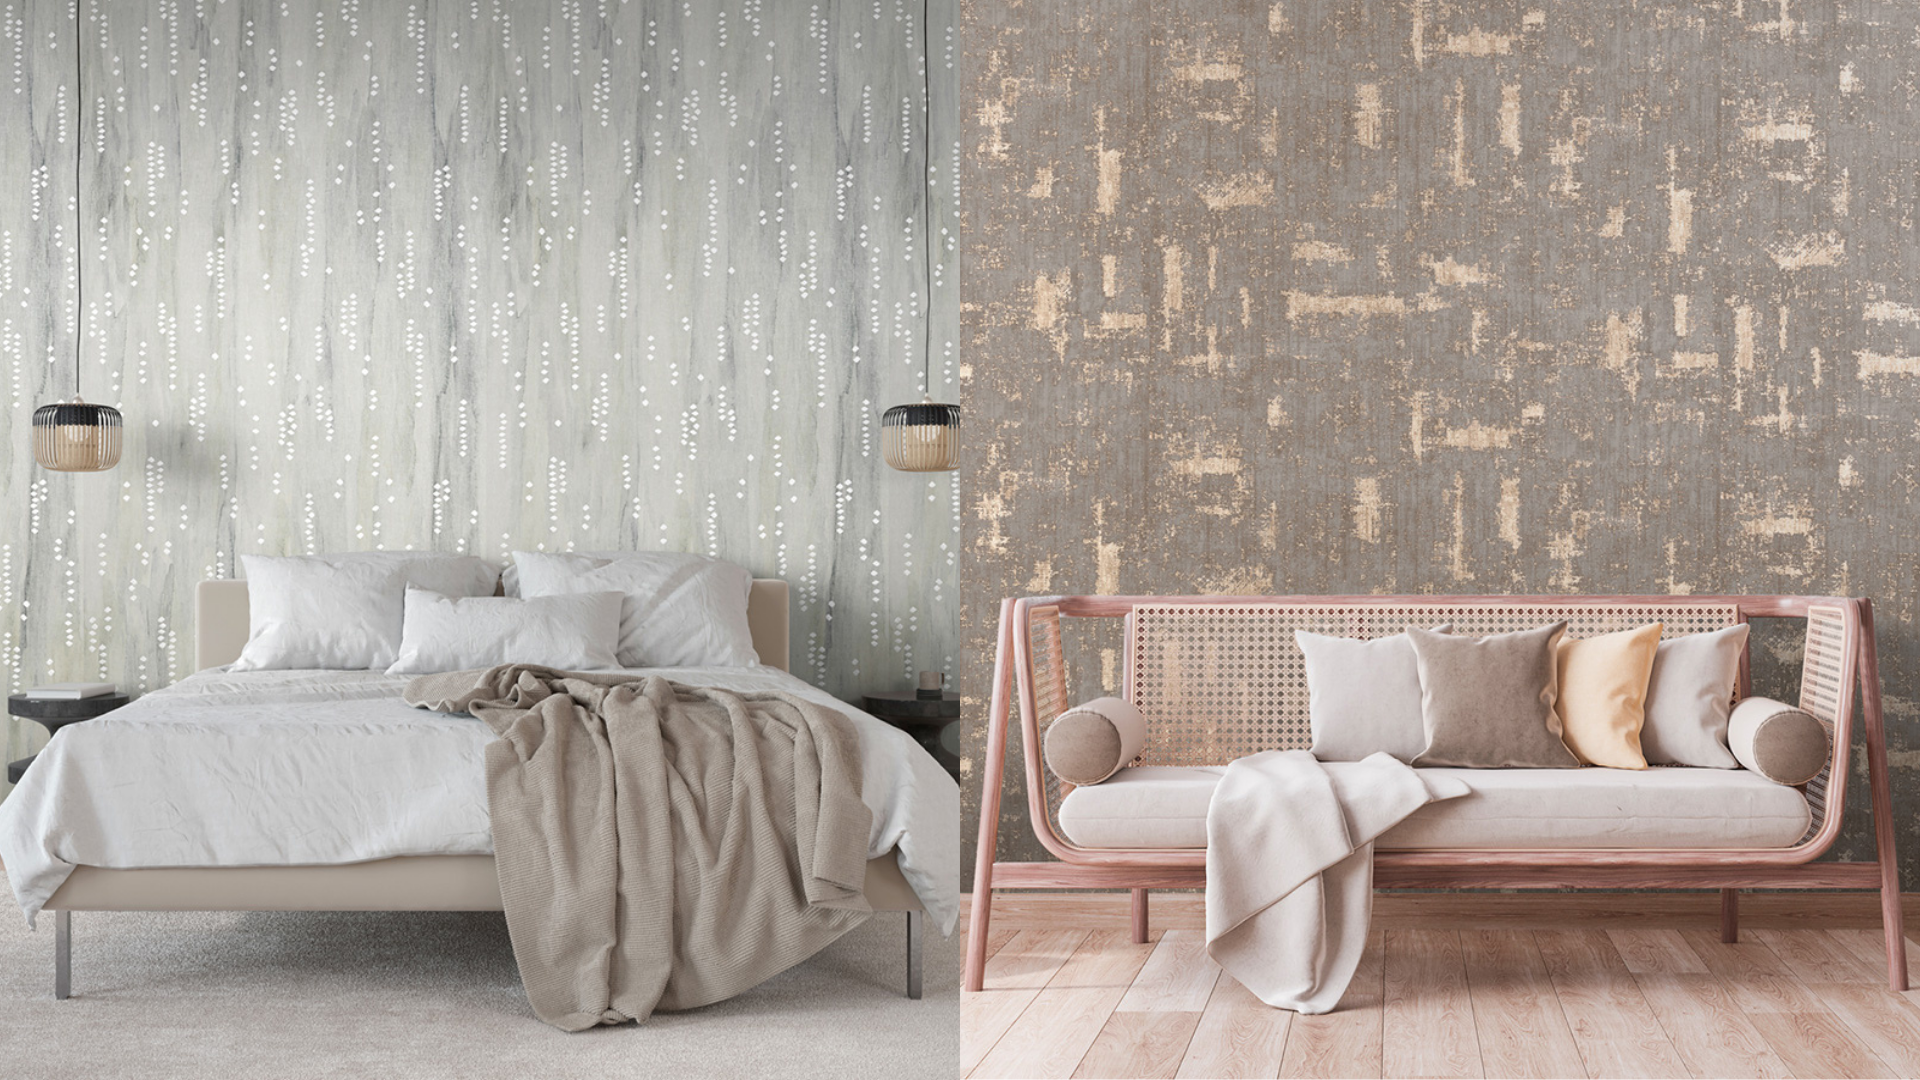 Wallpaper - no limits, just pure imagination that is natural on your walls. Most popular and trendy options in 2022.